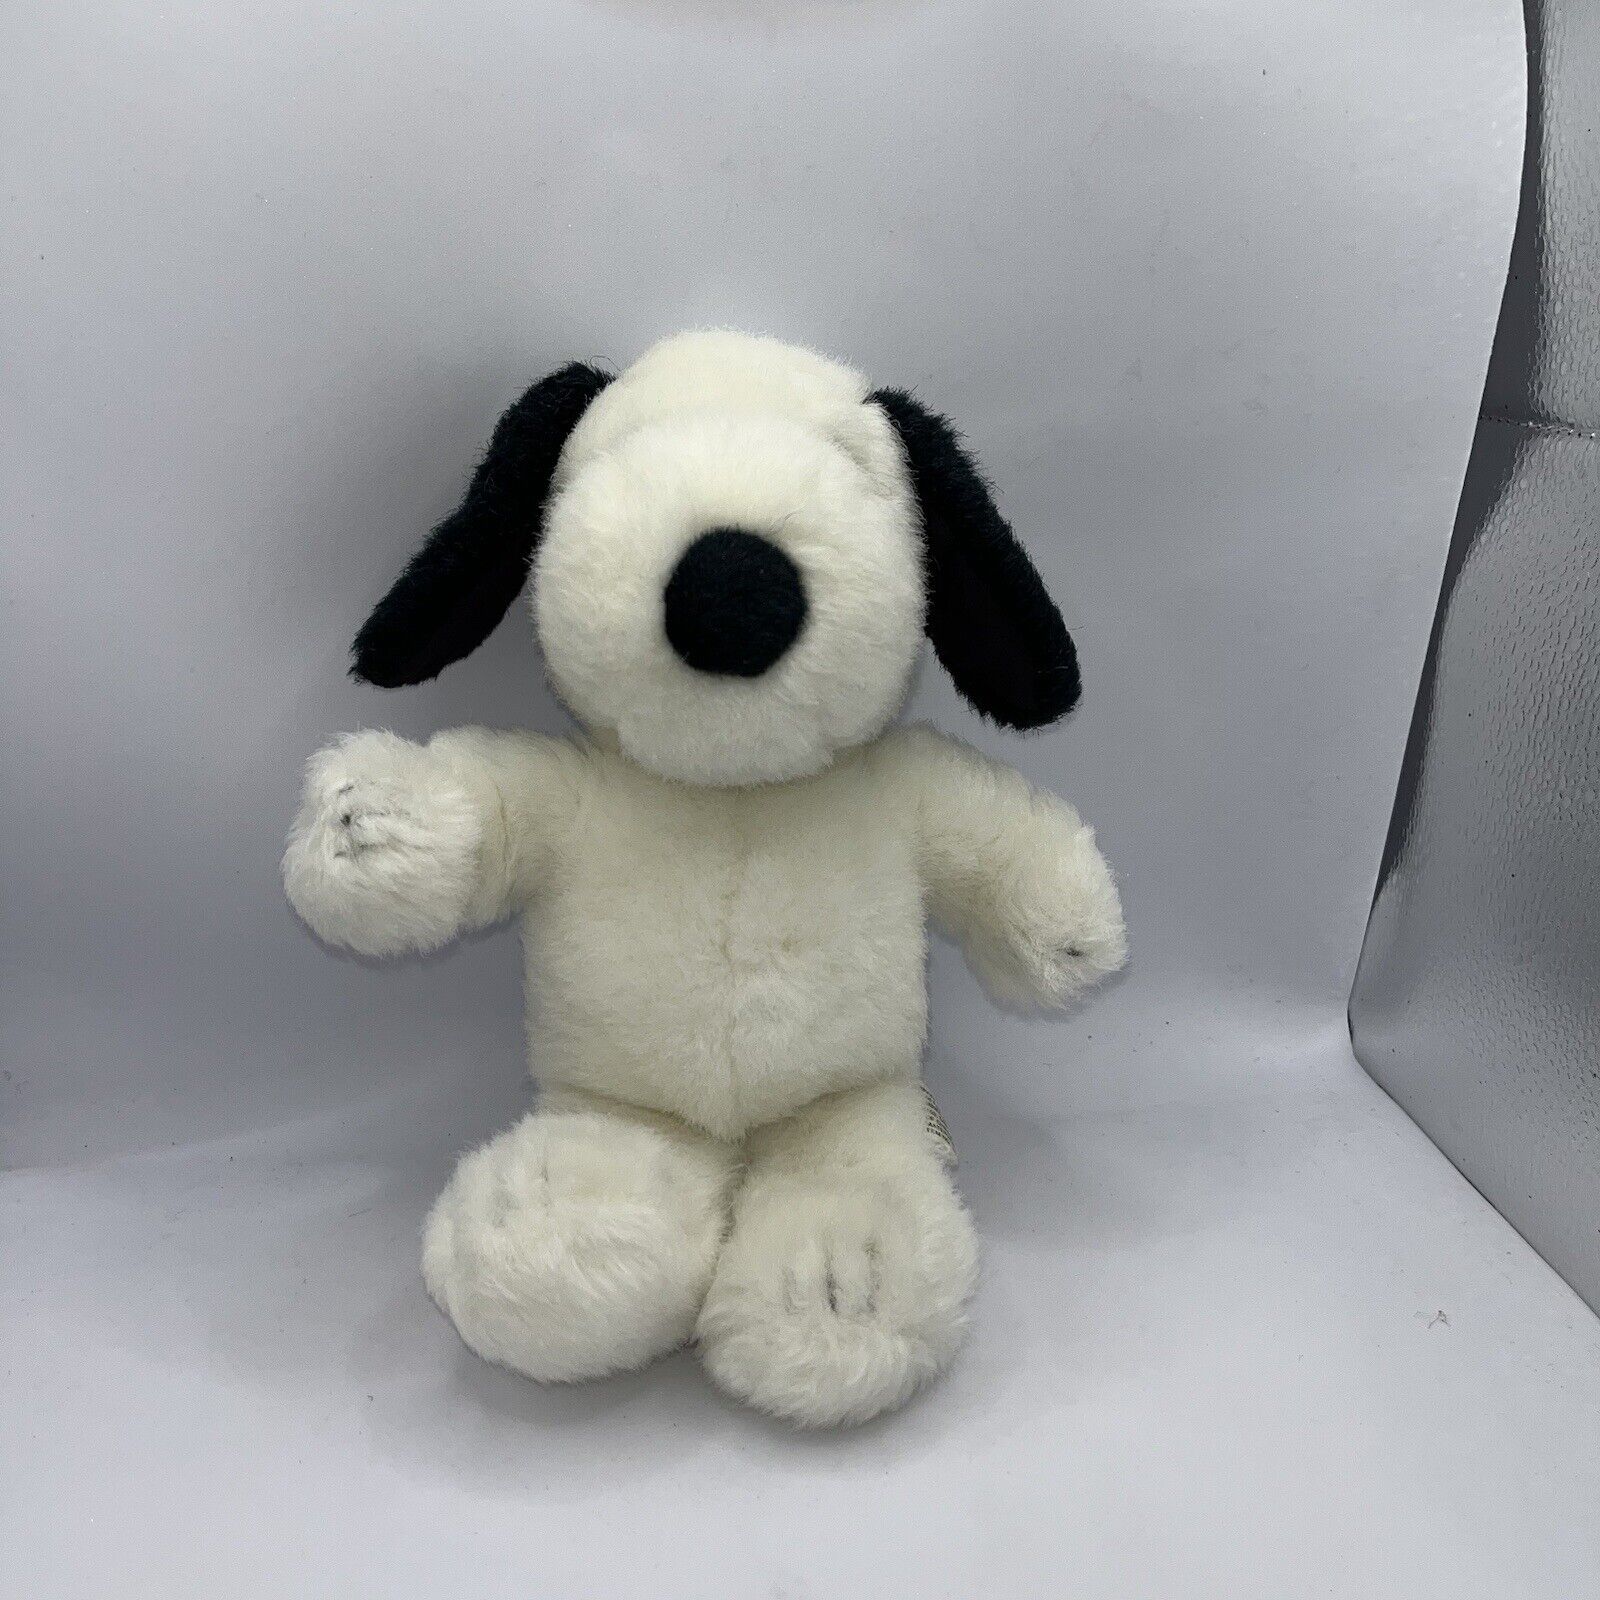 Vintage 1968 Snoopy 10” plush doll Peanuts United Feature Syndicate